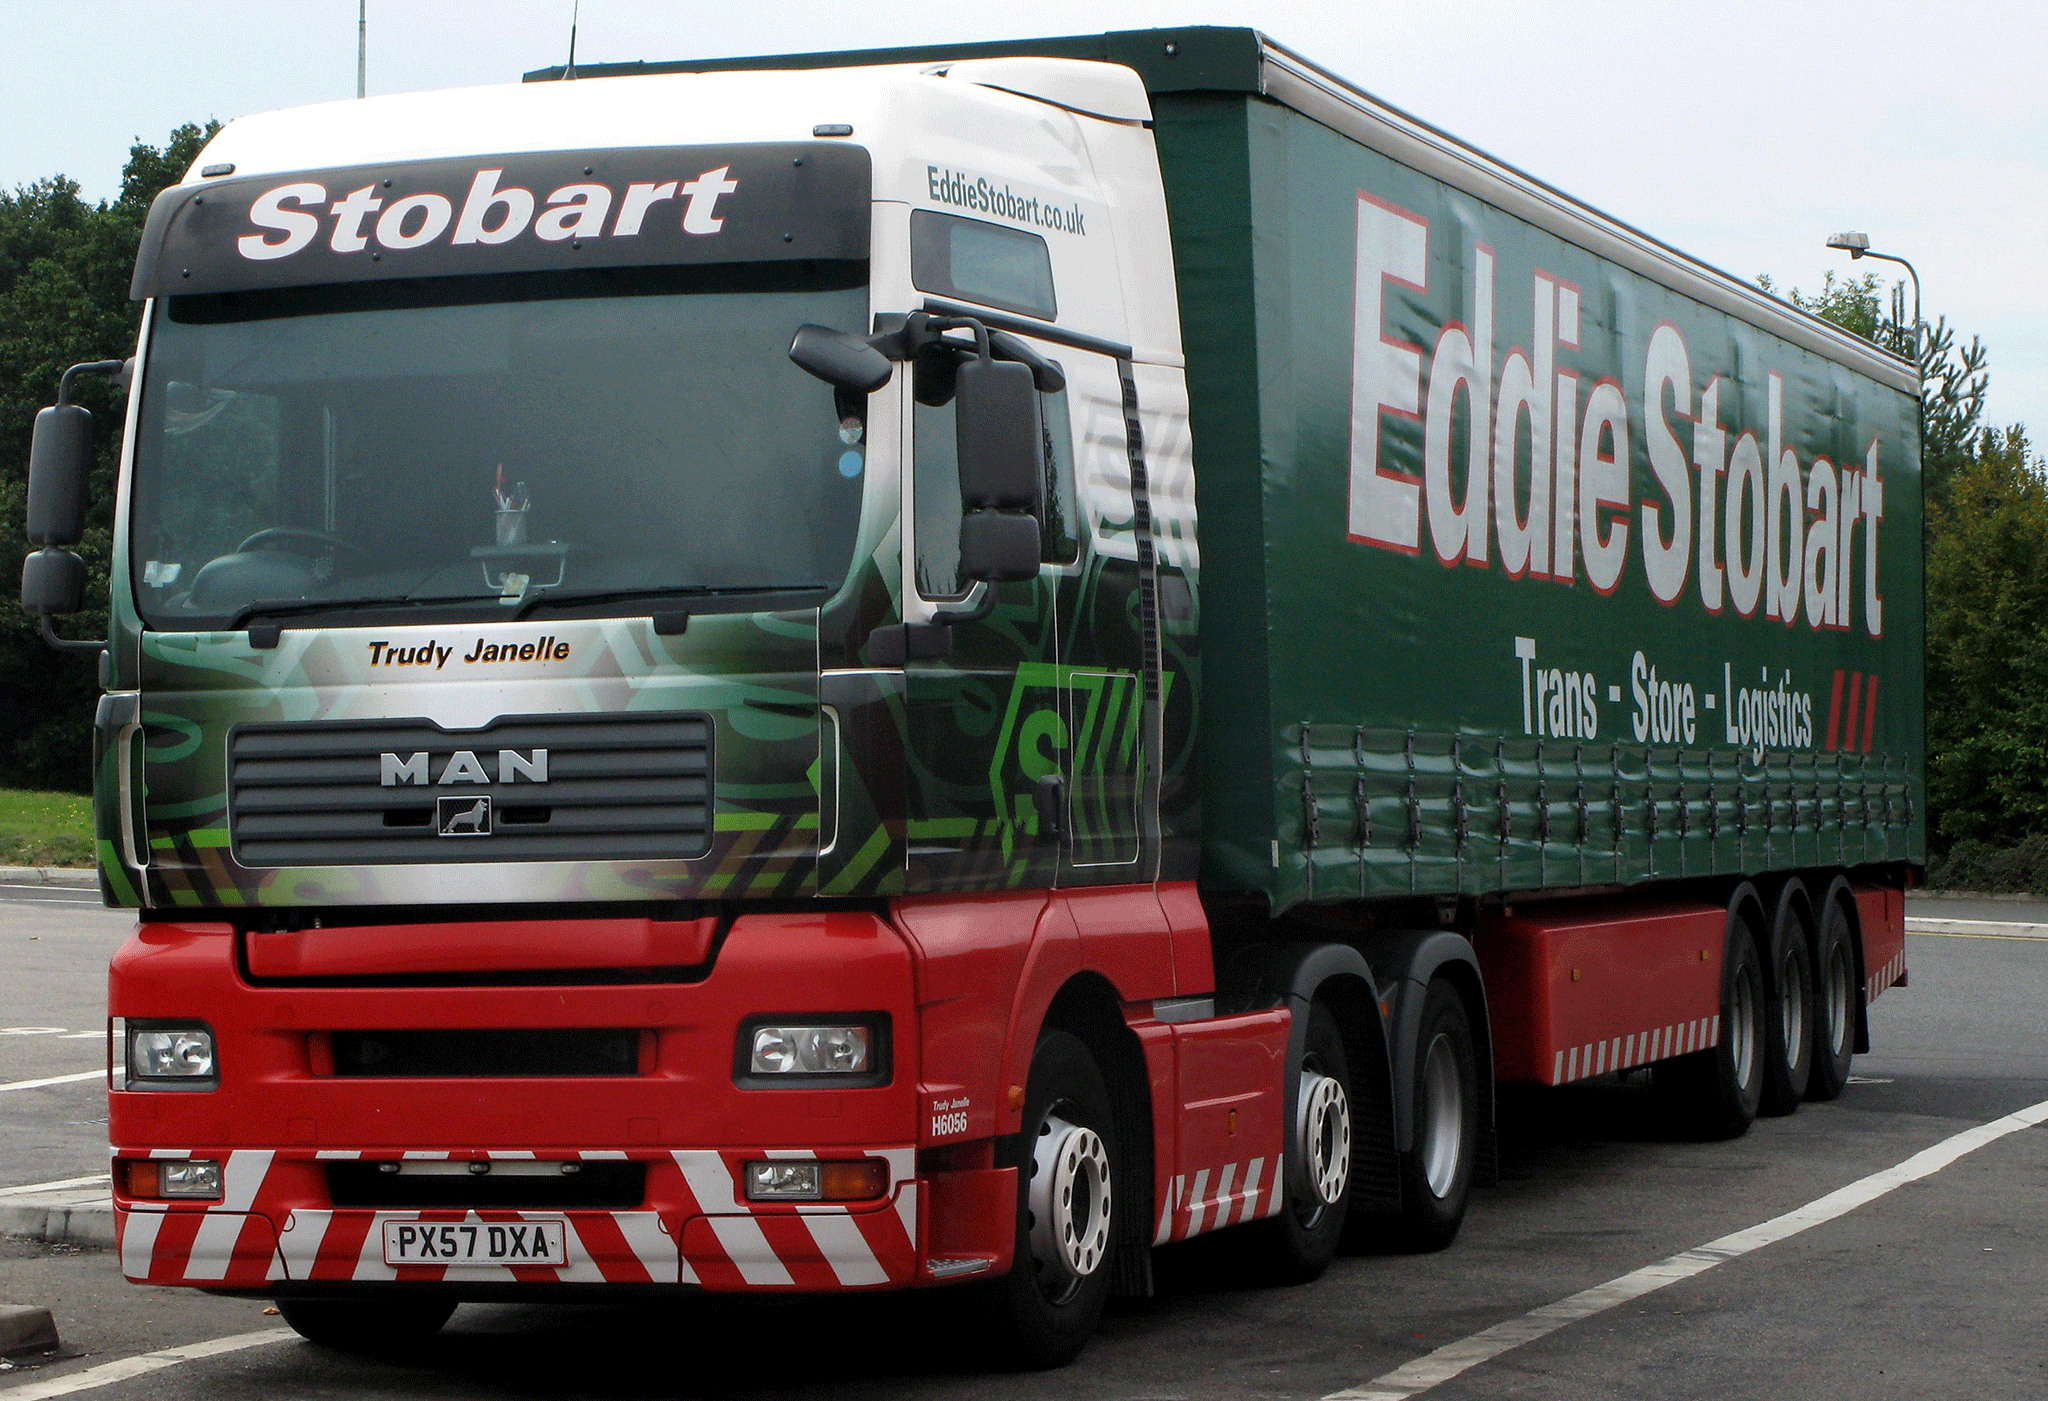 Eddie Stobart’s board rejected a rescue package proposed by former chief executive Andrew Tinkler earlier this week